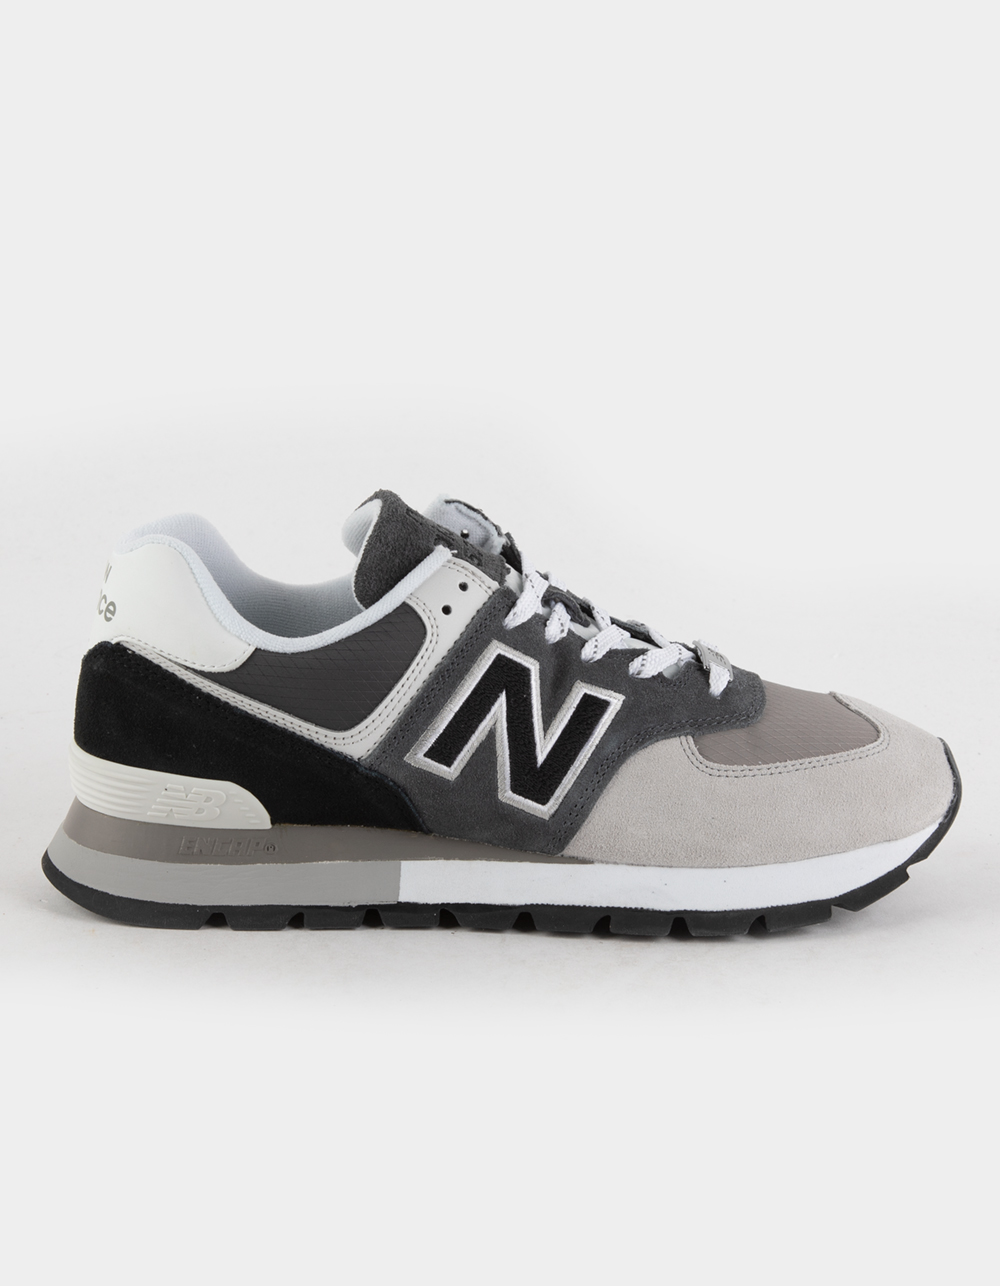 NEW BALANCE 574 Rugged Mens Shoes - WHT/GRAY | Tillys